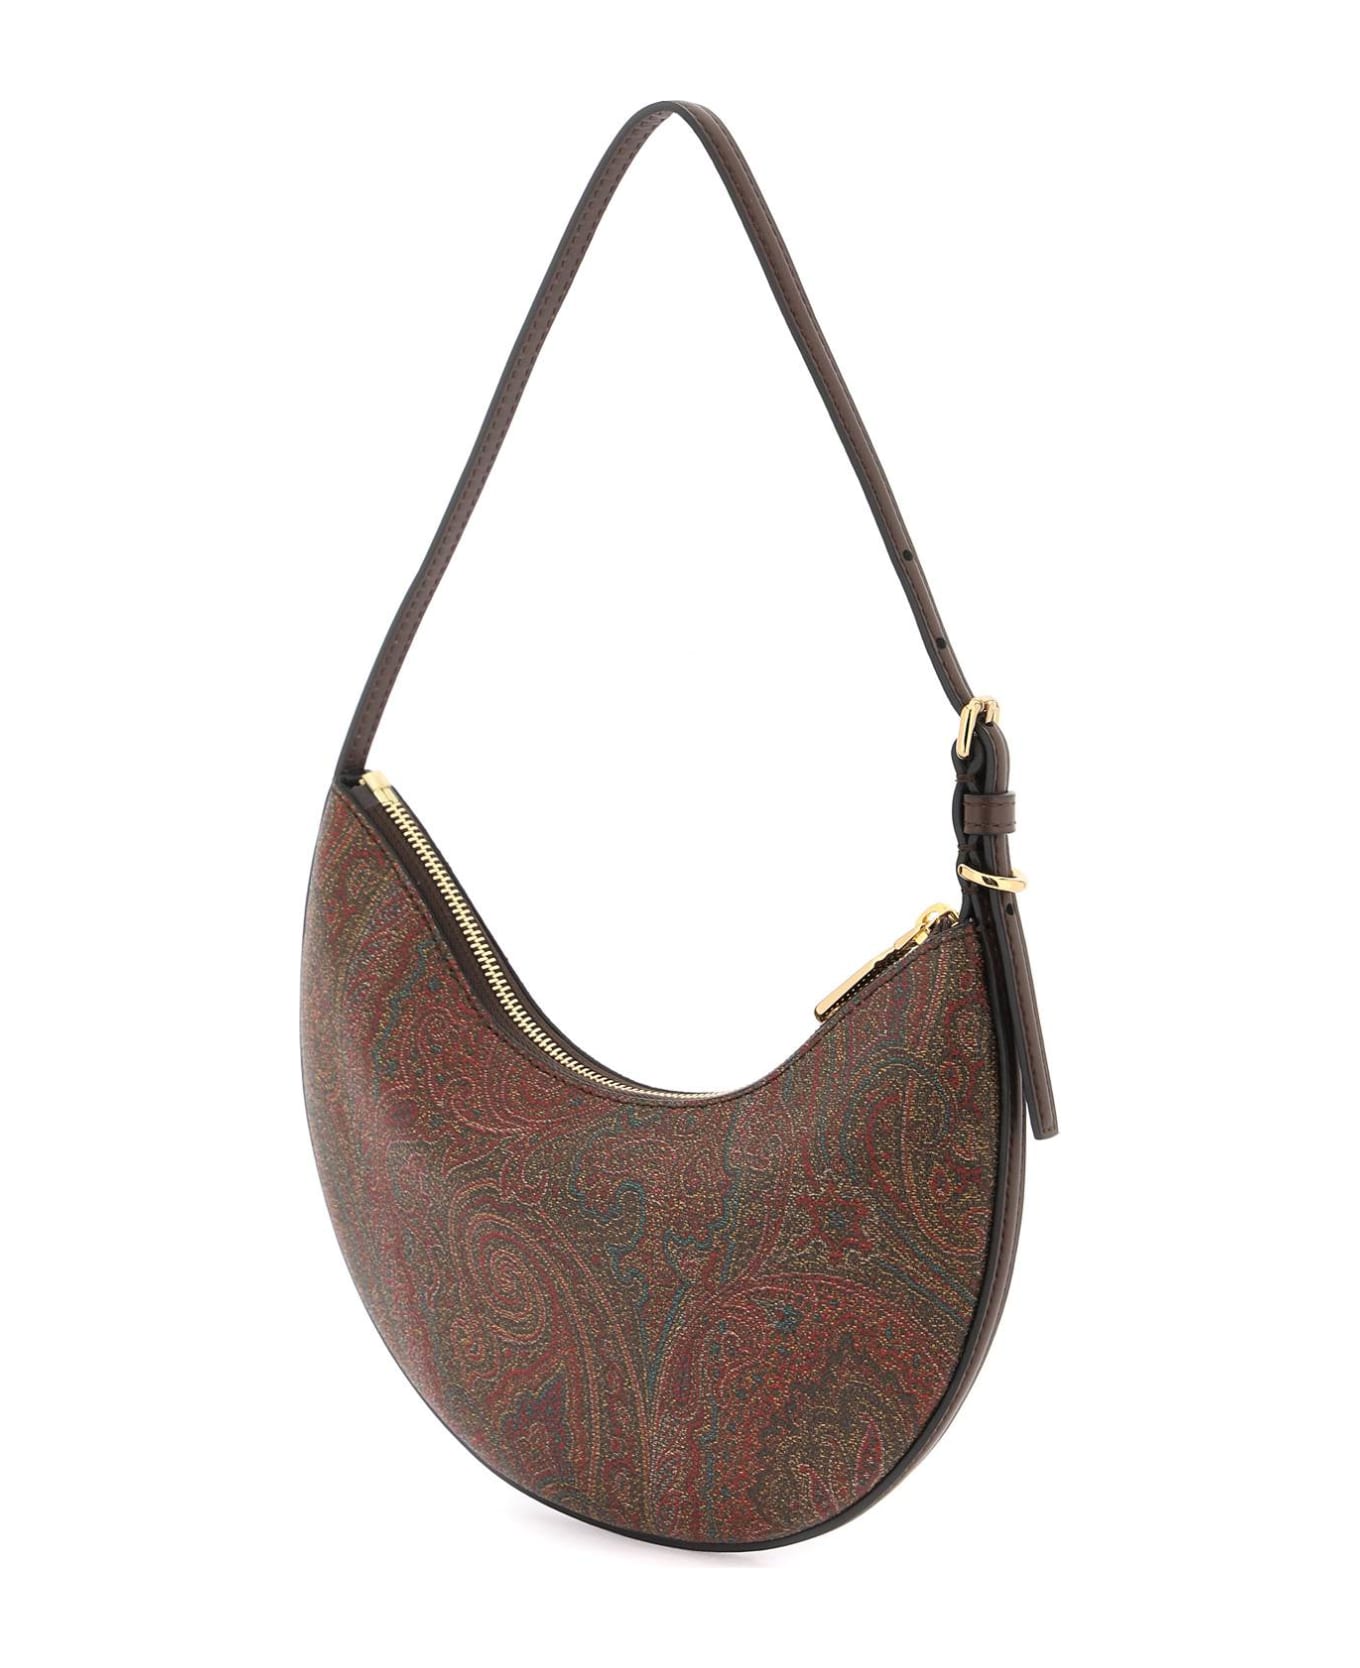 Etro Brown Leather Blend Bag - Brown